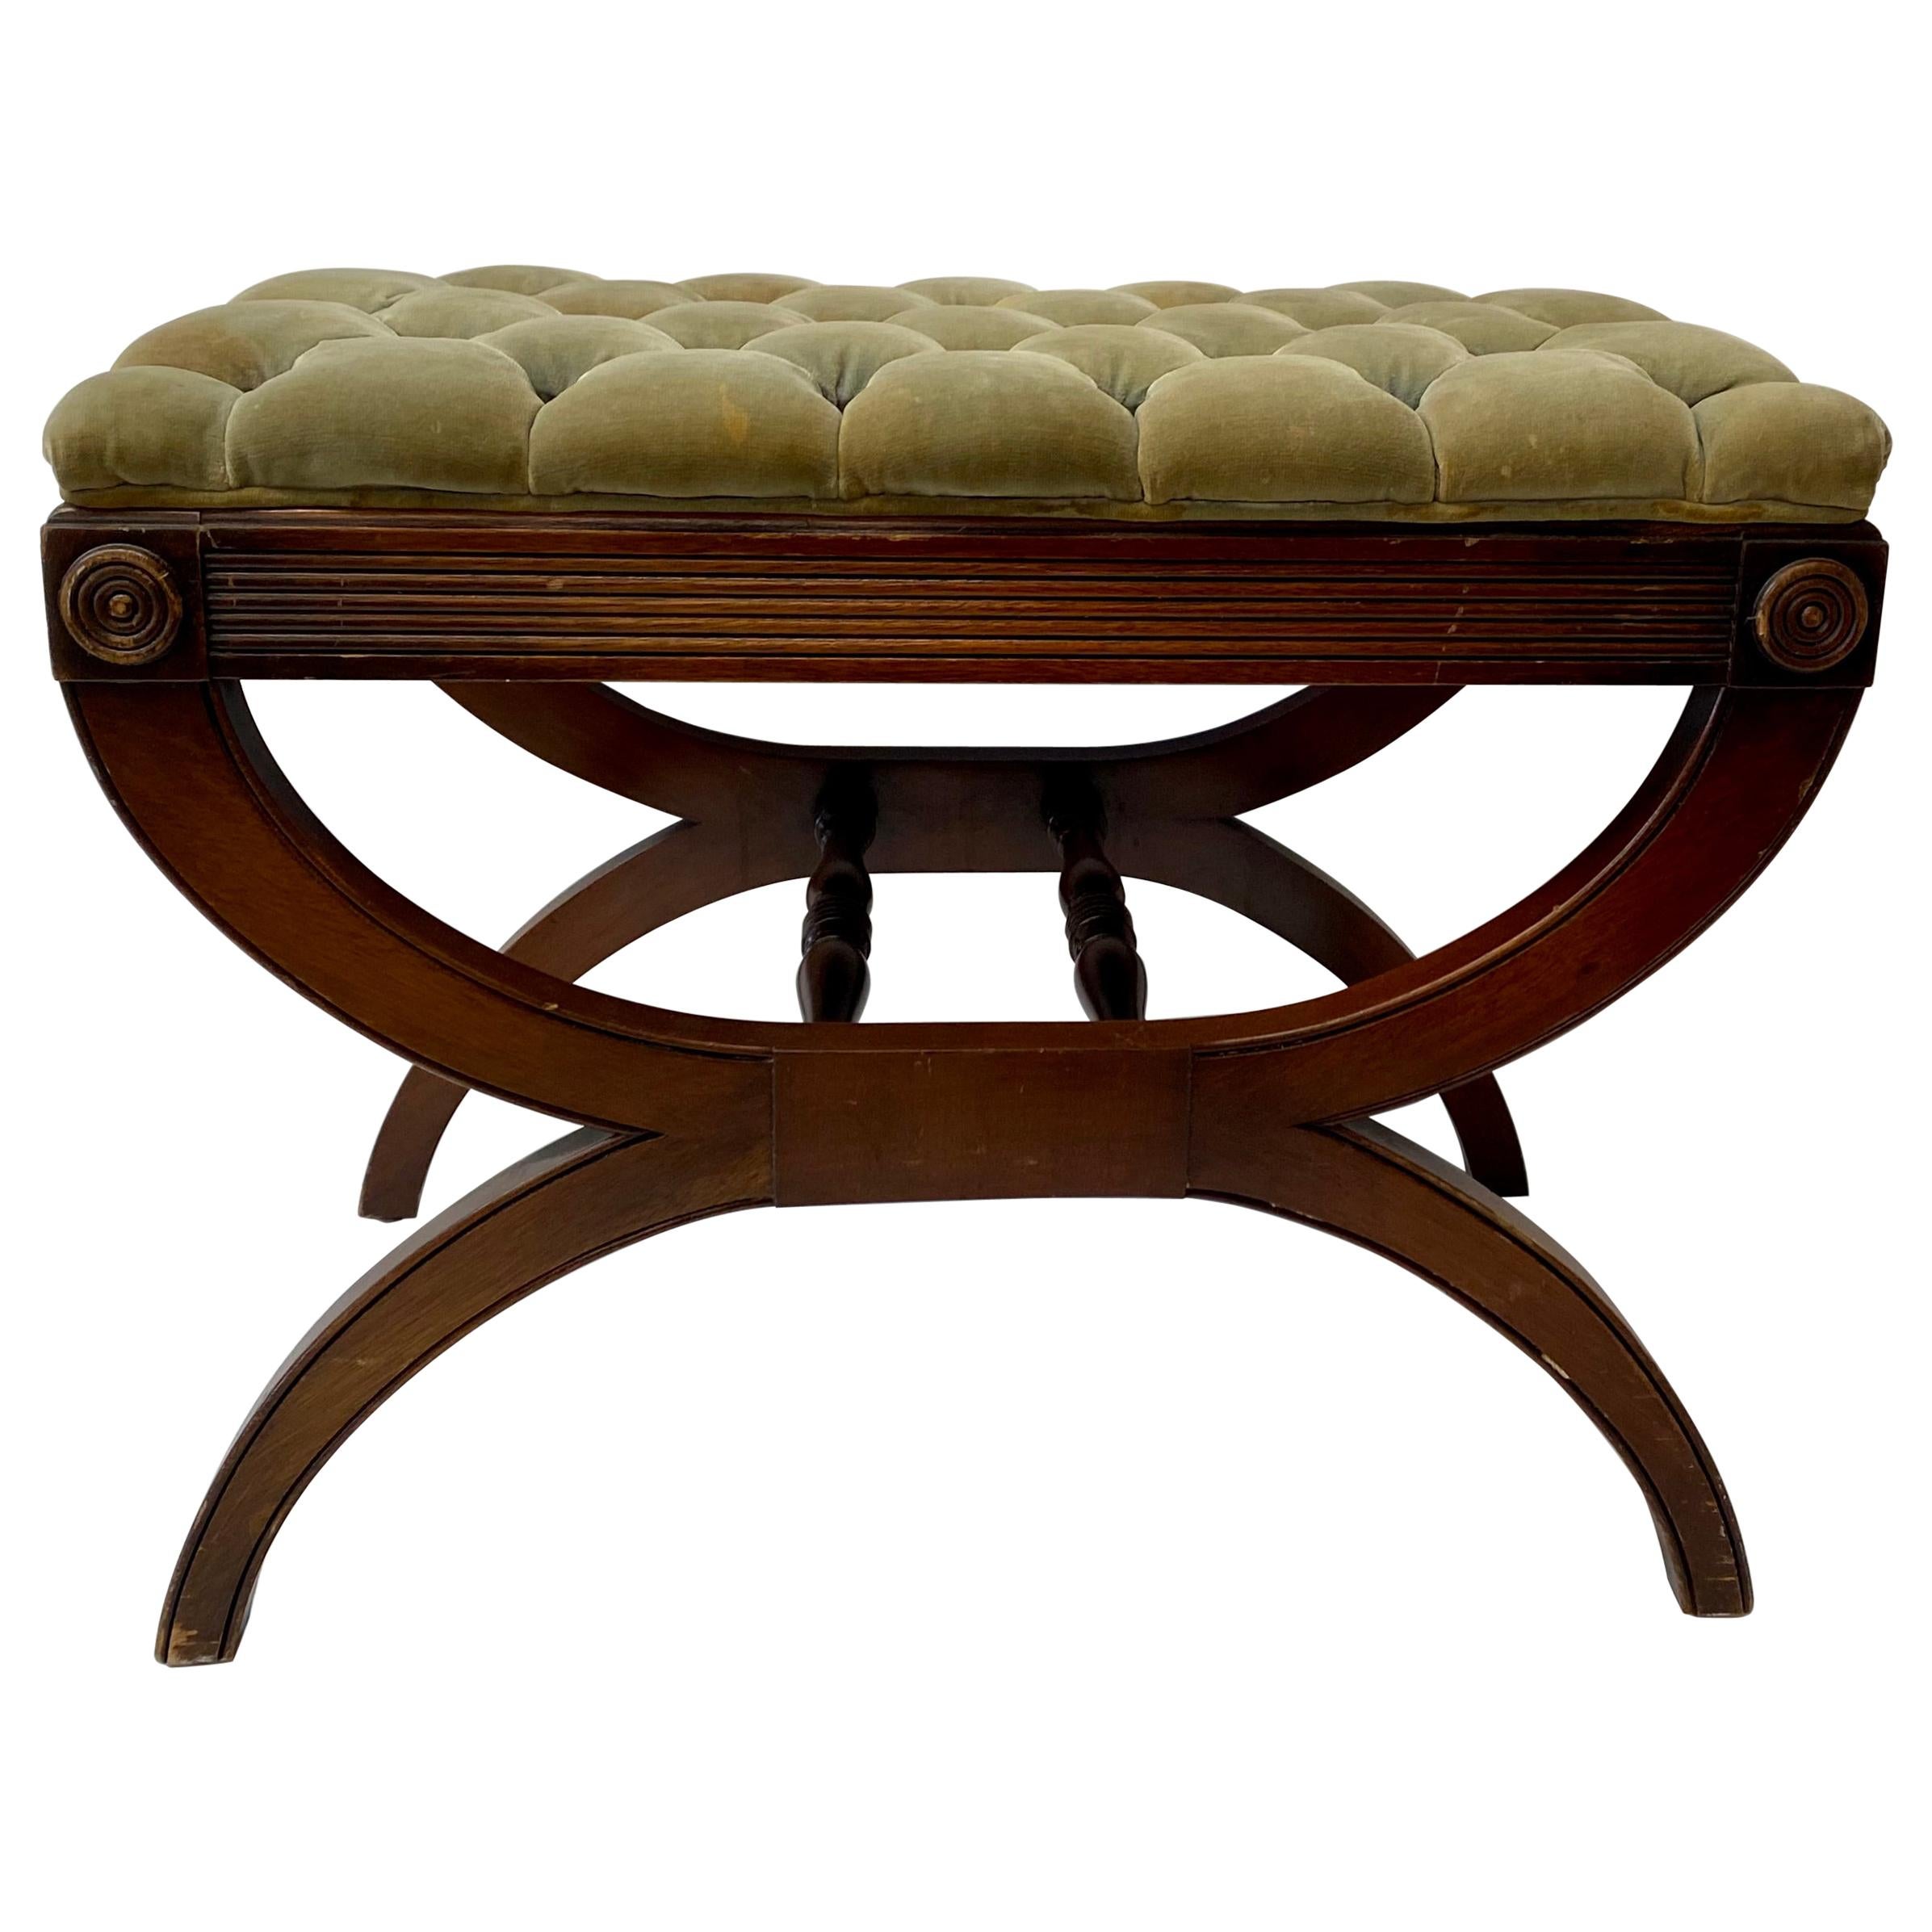 Vintage Mahogany & Tufted Upholstery Crule Bench, C.1930s